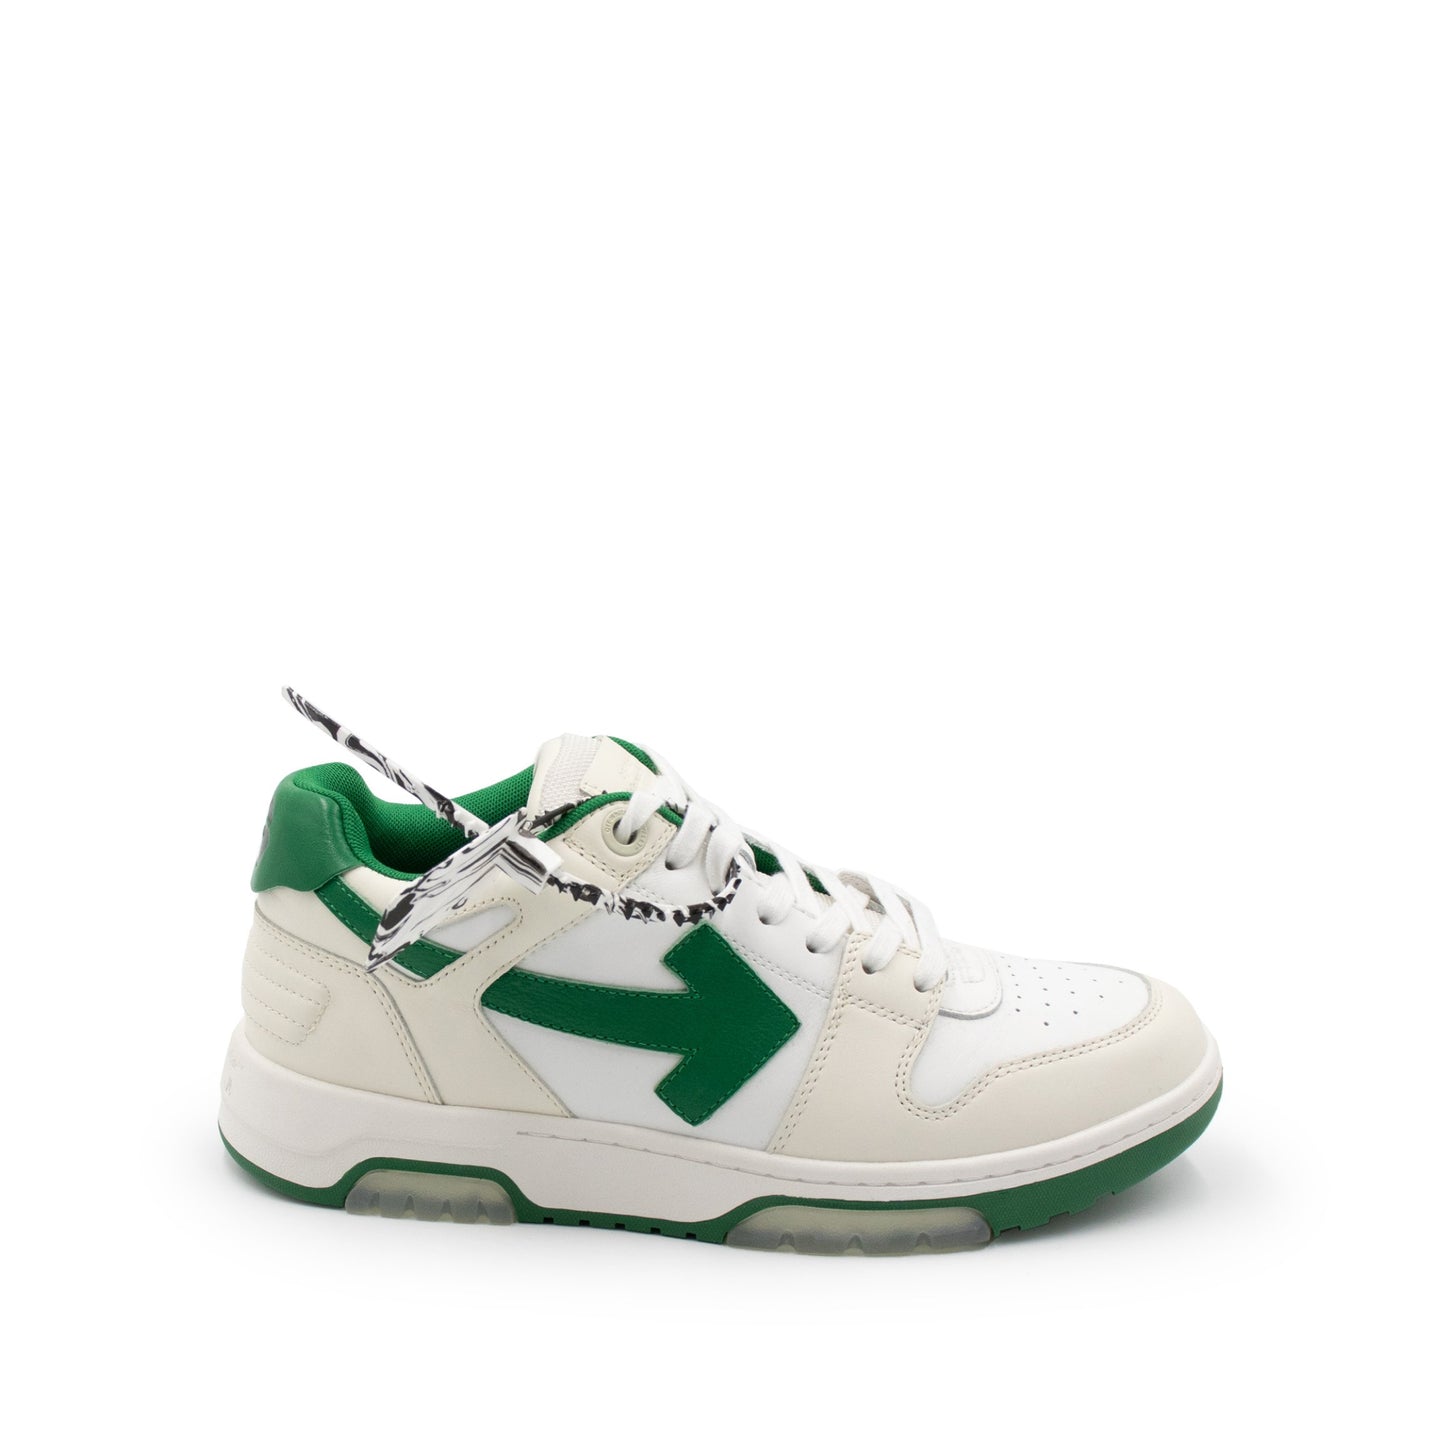 Out Of Office Low Sneaker in White/Green